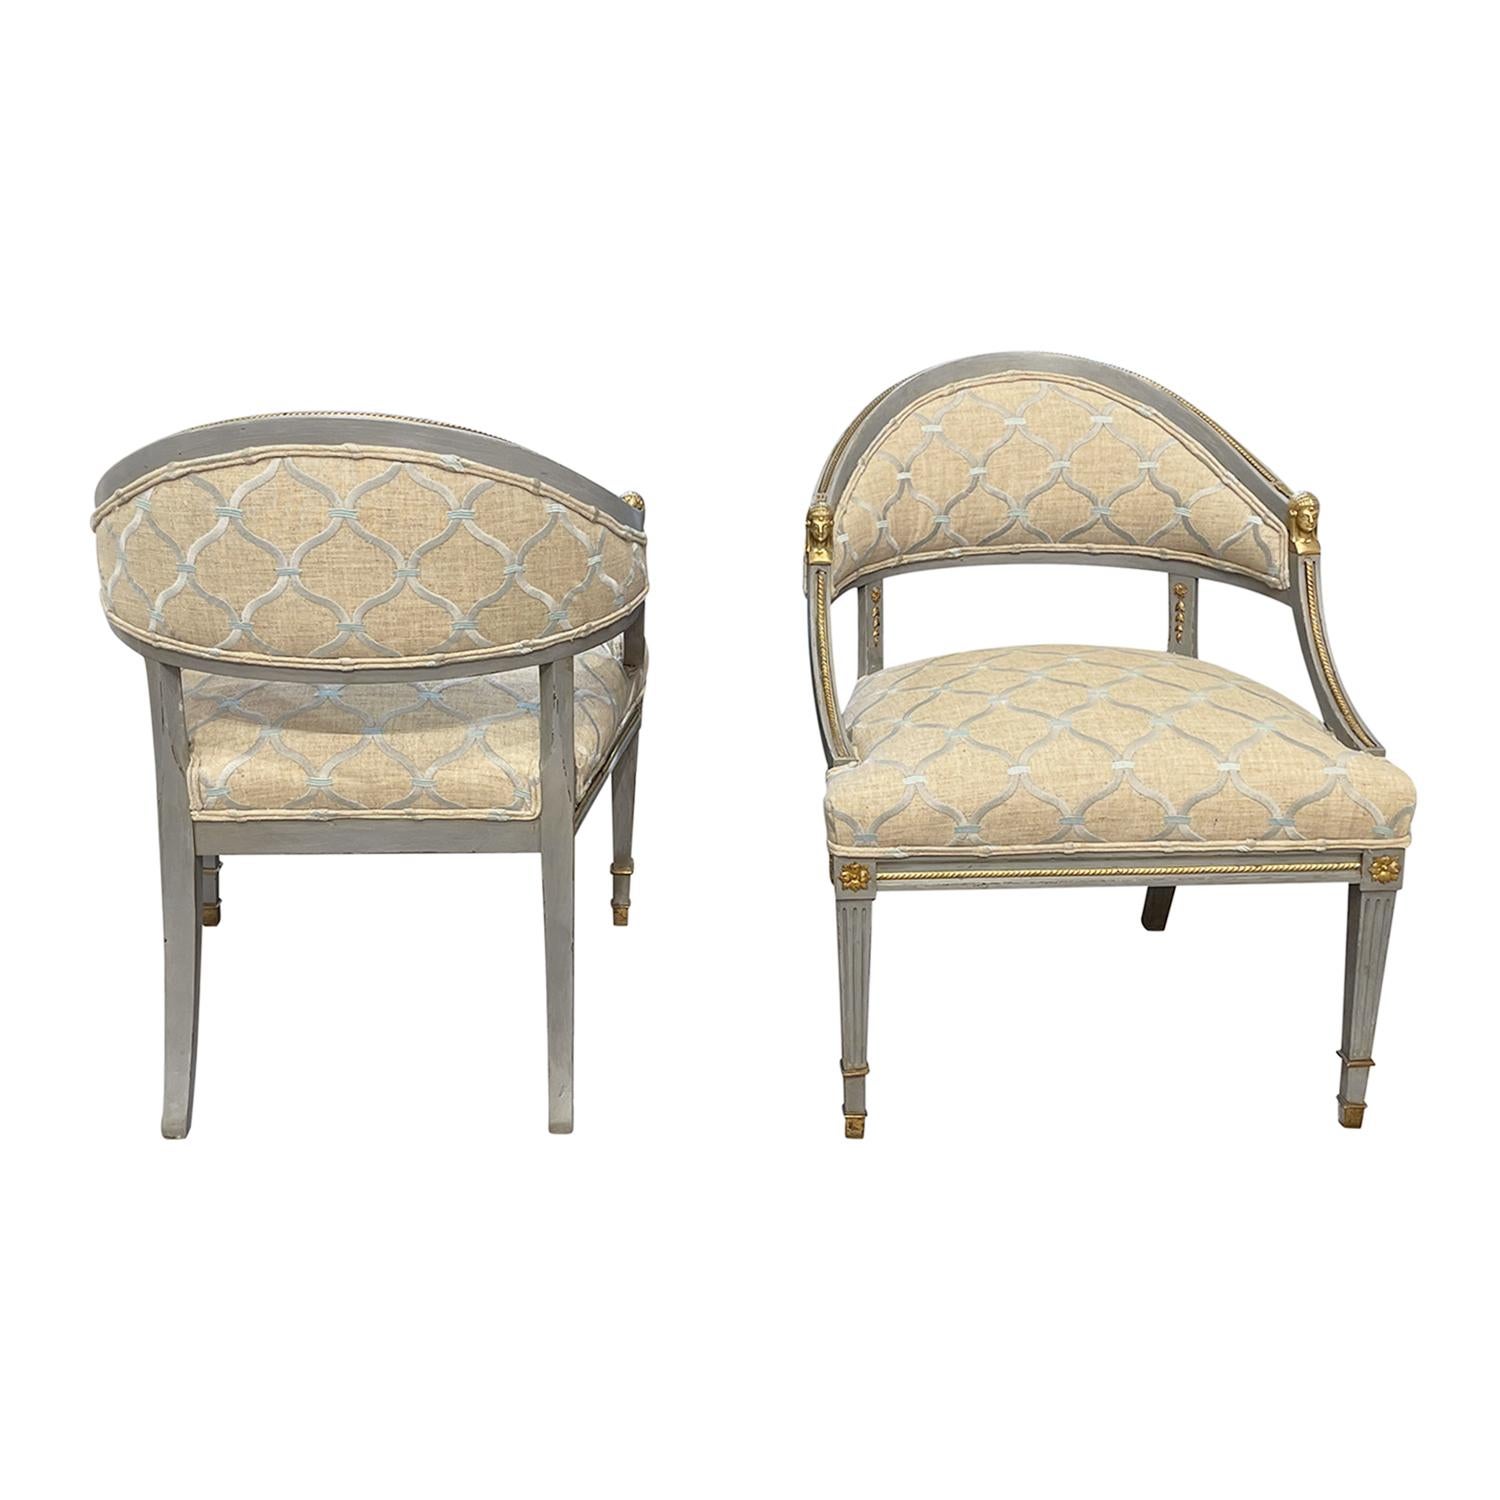 Polished 19th Century Pair of Swedish Gustavian Birch Chairs Attributed to Ephraim Ståhl For Sale